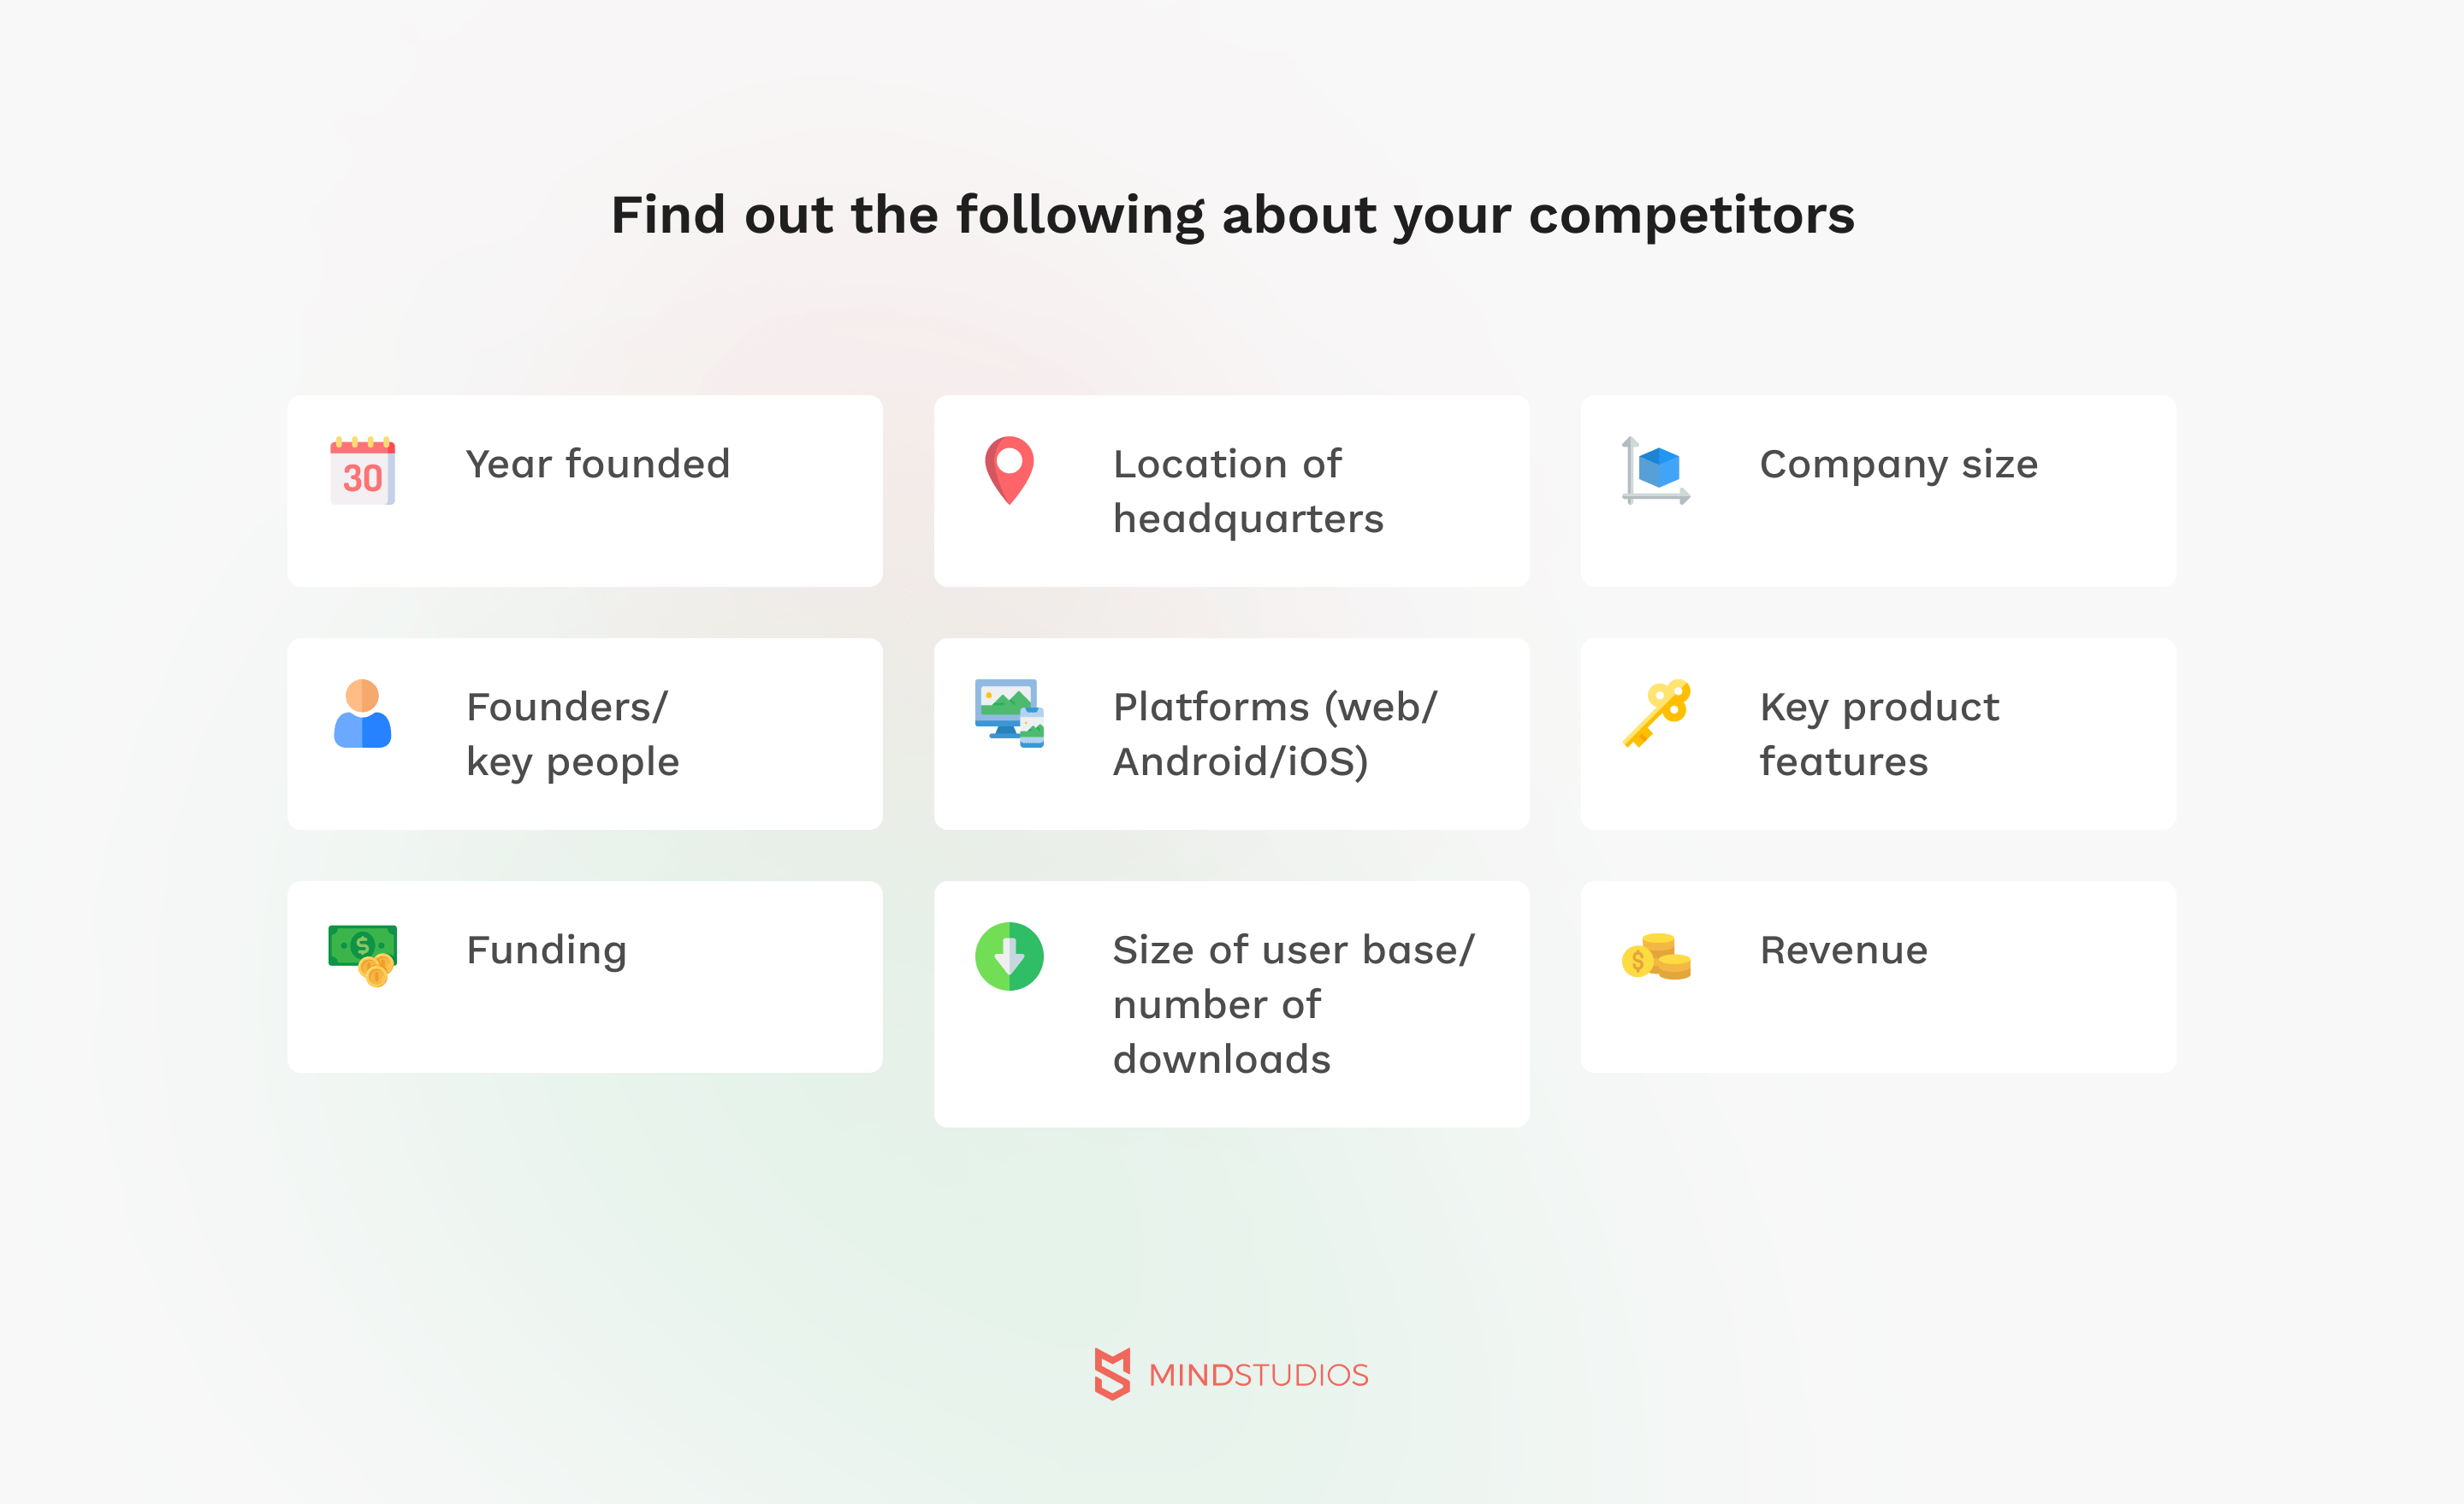 Find out the following about your competitors